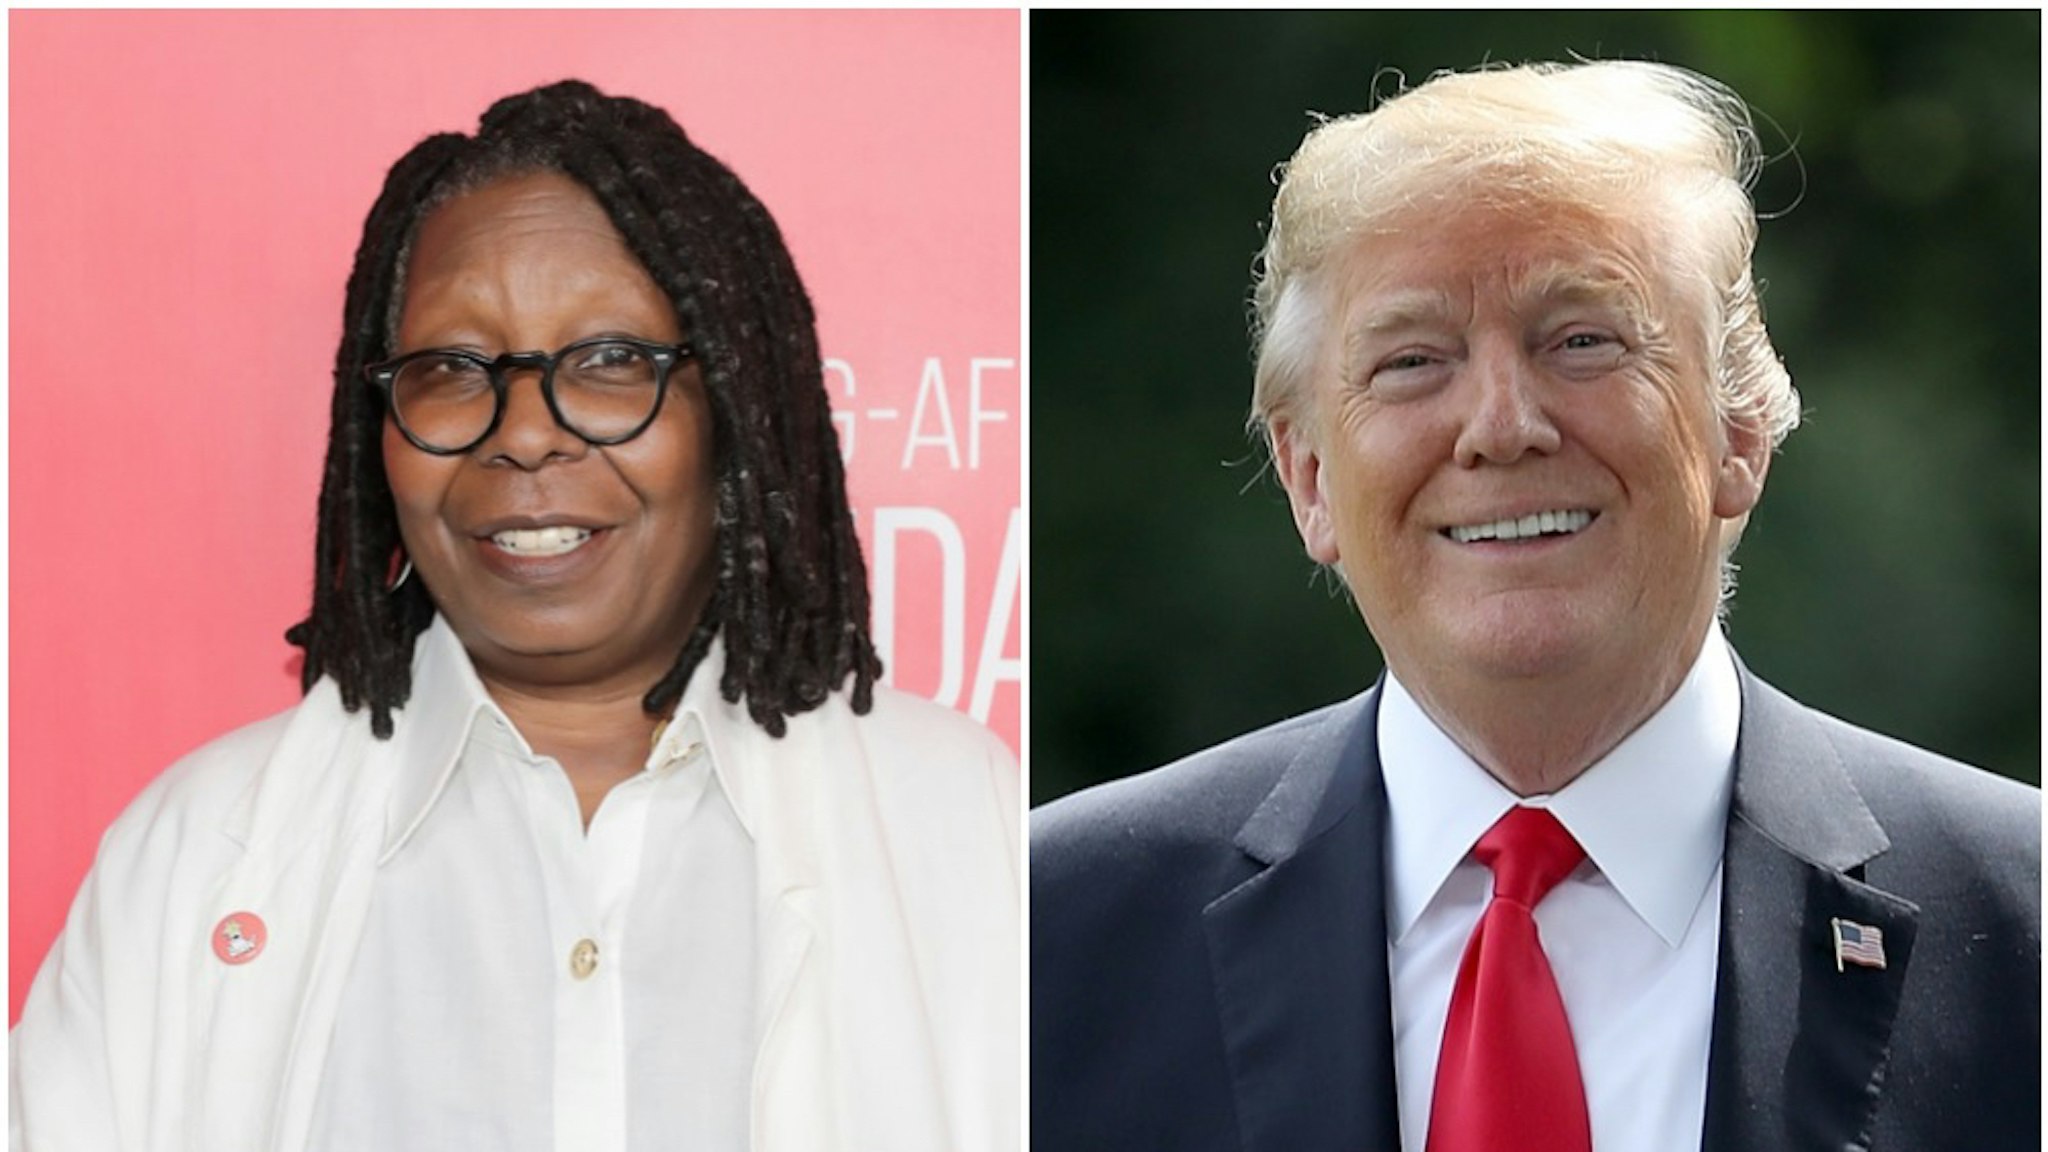 Actress Whoopi Goldberg attends the grand opening Of SAG-AFTRA Foundation's Robin Williams Center on October 5, 2016 in New York City. U.S. President Donald Trump gestures toward journalists shouting questions as he departs the White House May 29, 2018 in Washington, DC. Trump is scheduled to travel to Nashville, Tennessee later today for a campaign rally.